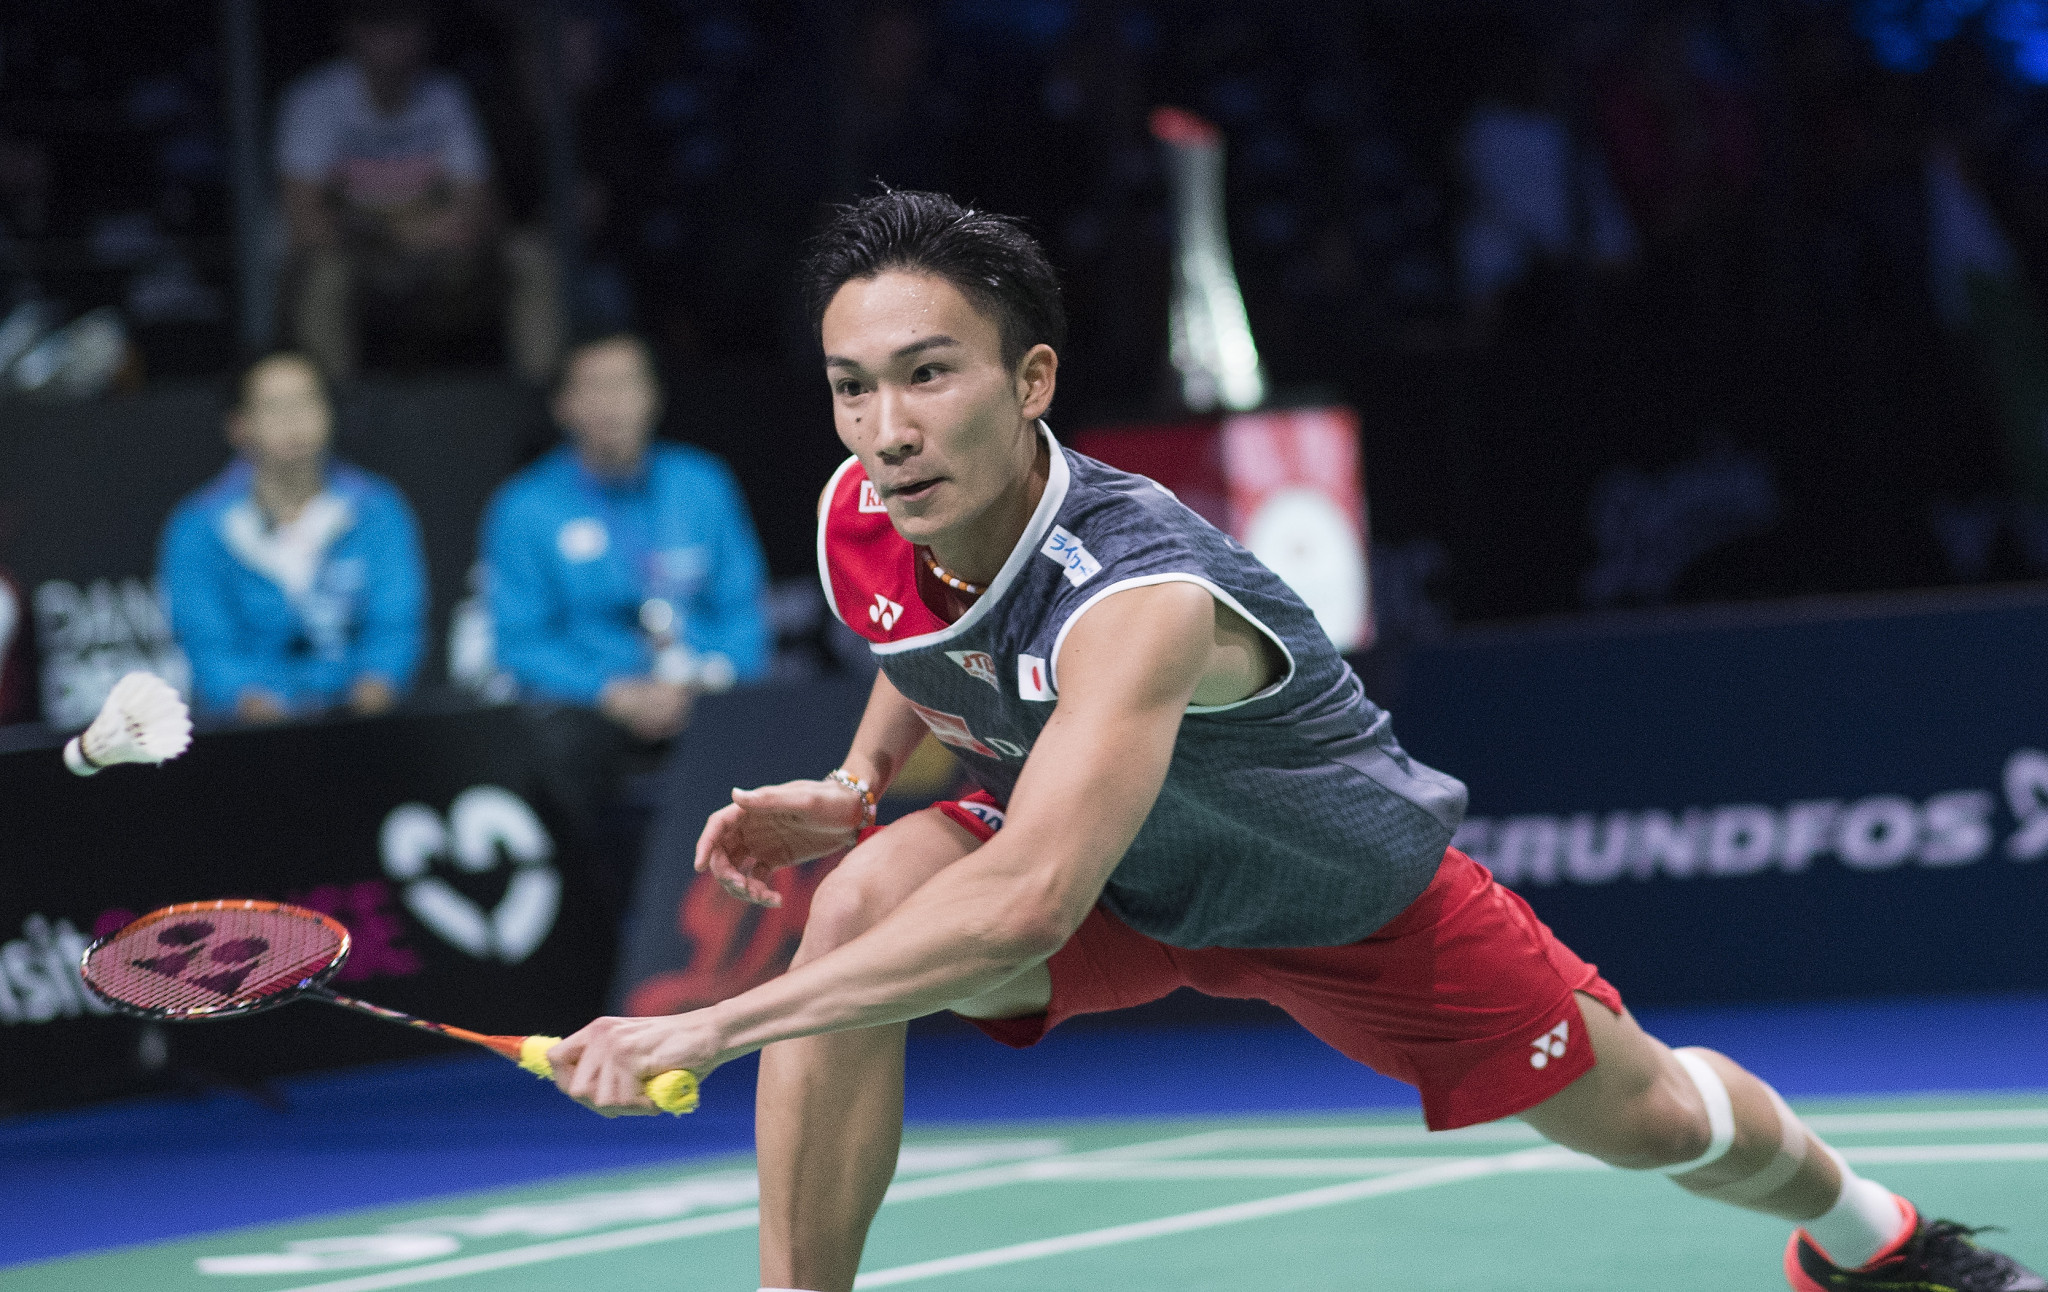 Kento Momota continued his bid for a second straight title ©Getty Images